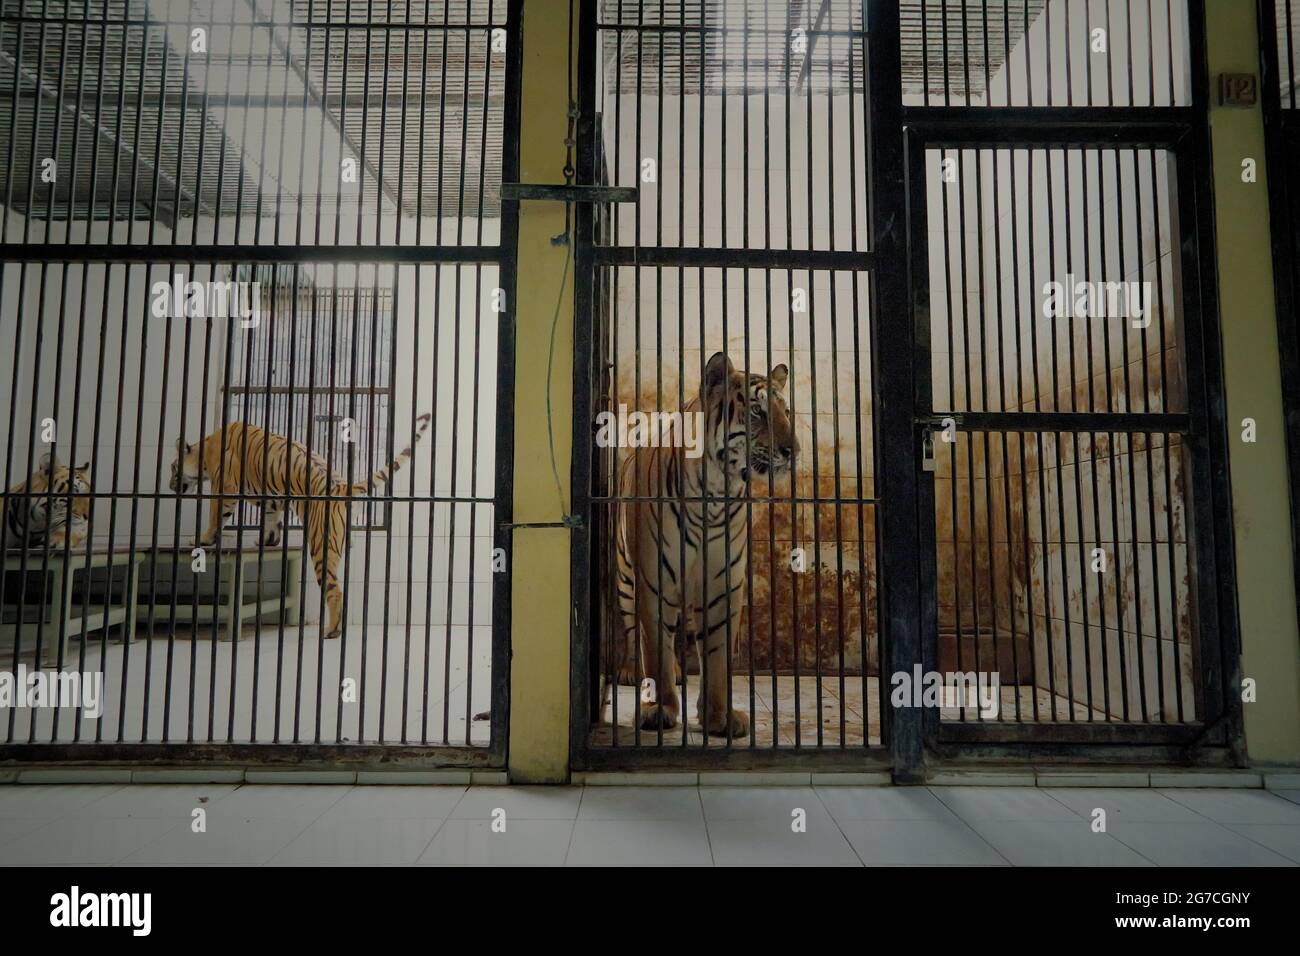 Sumatran tigers (left) and a Bengal tiger (right) at the veterinary facility managed by Bali Zoo in Gianyar, Bali, Indonesia. Stock Photo